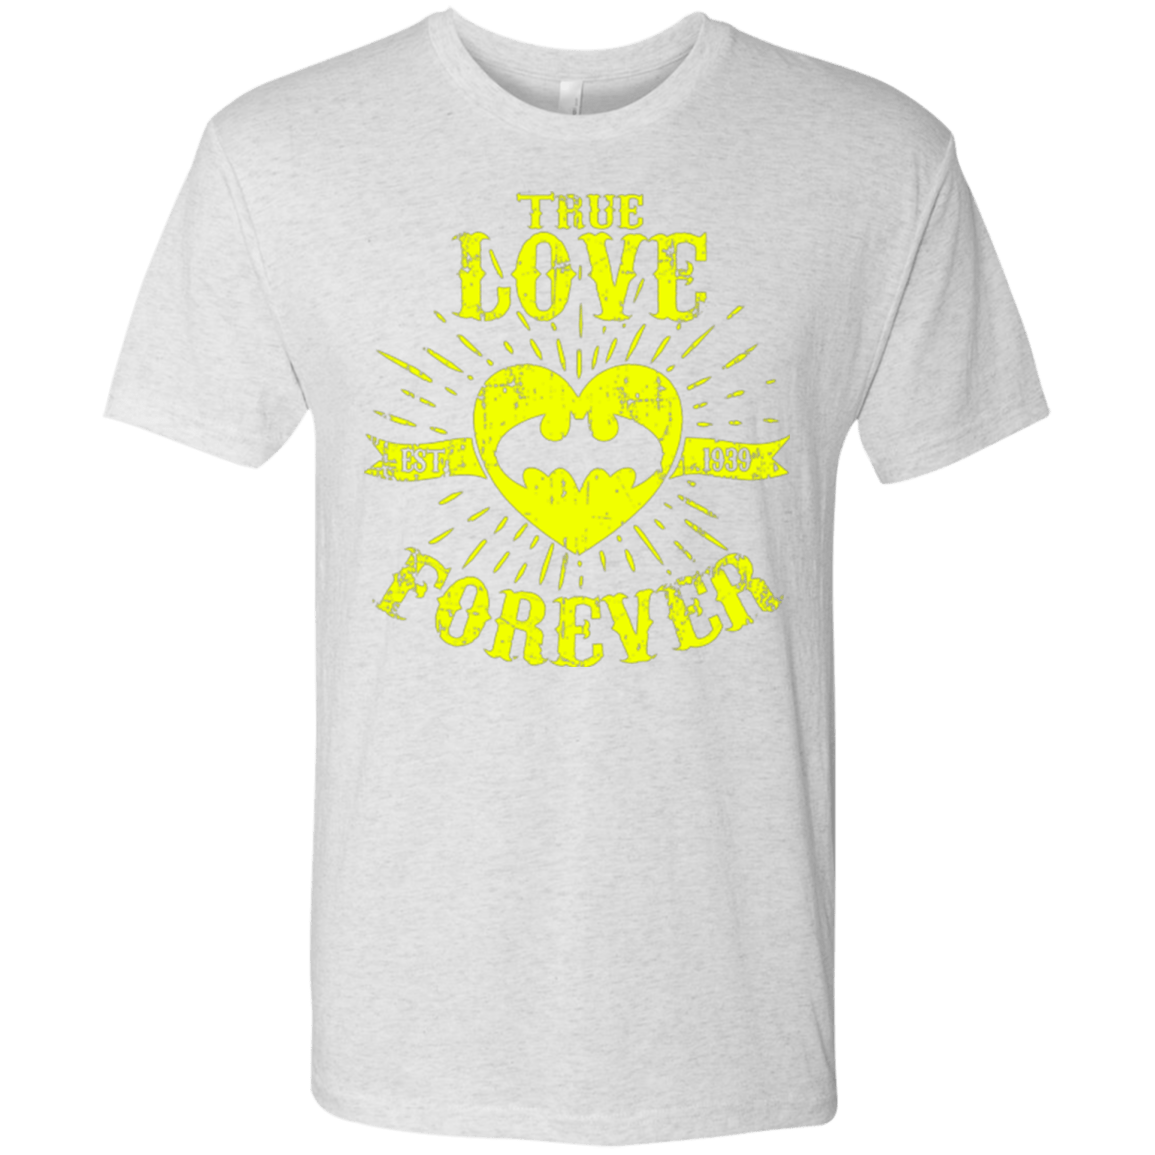 T-Shirts Heather White / Small TLF DETECTIVE Men's Triblend T-Shirt